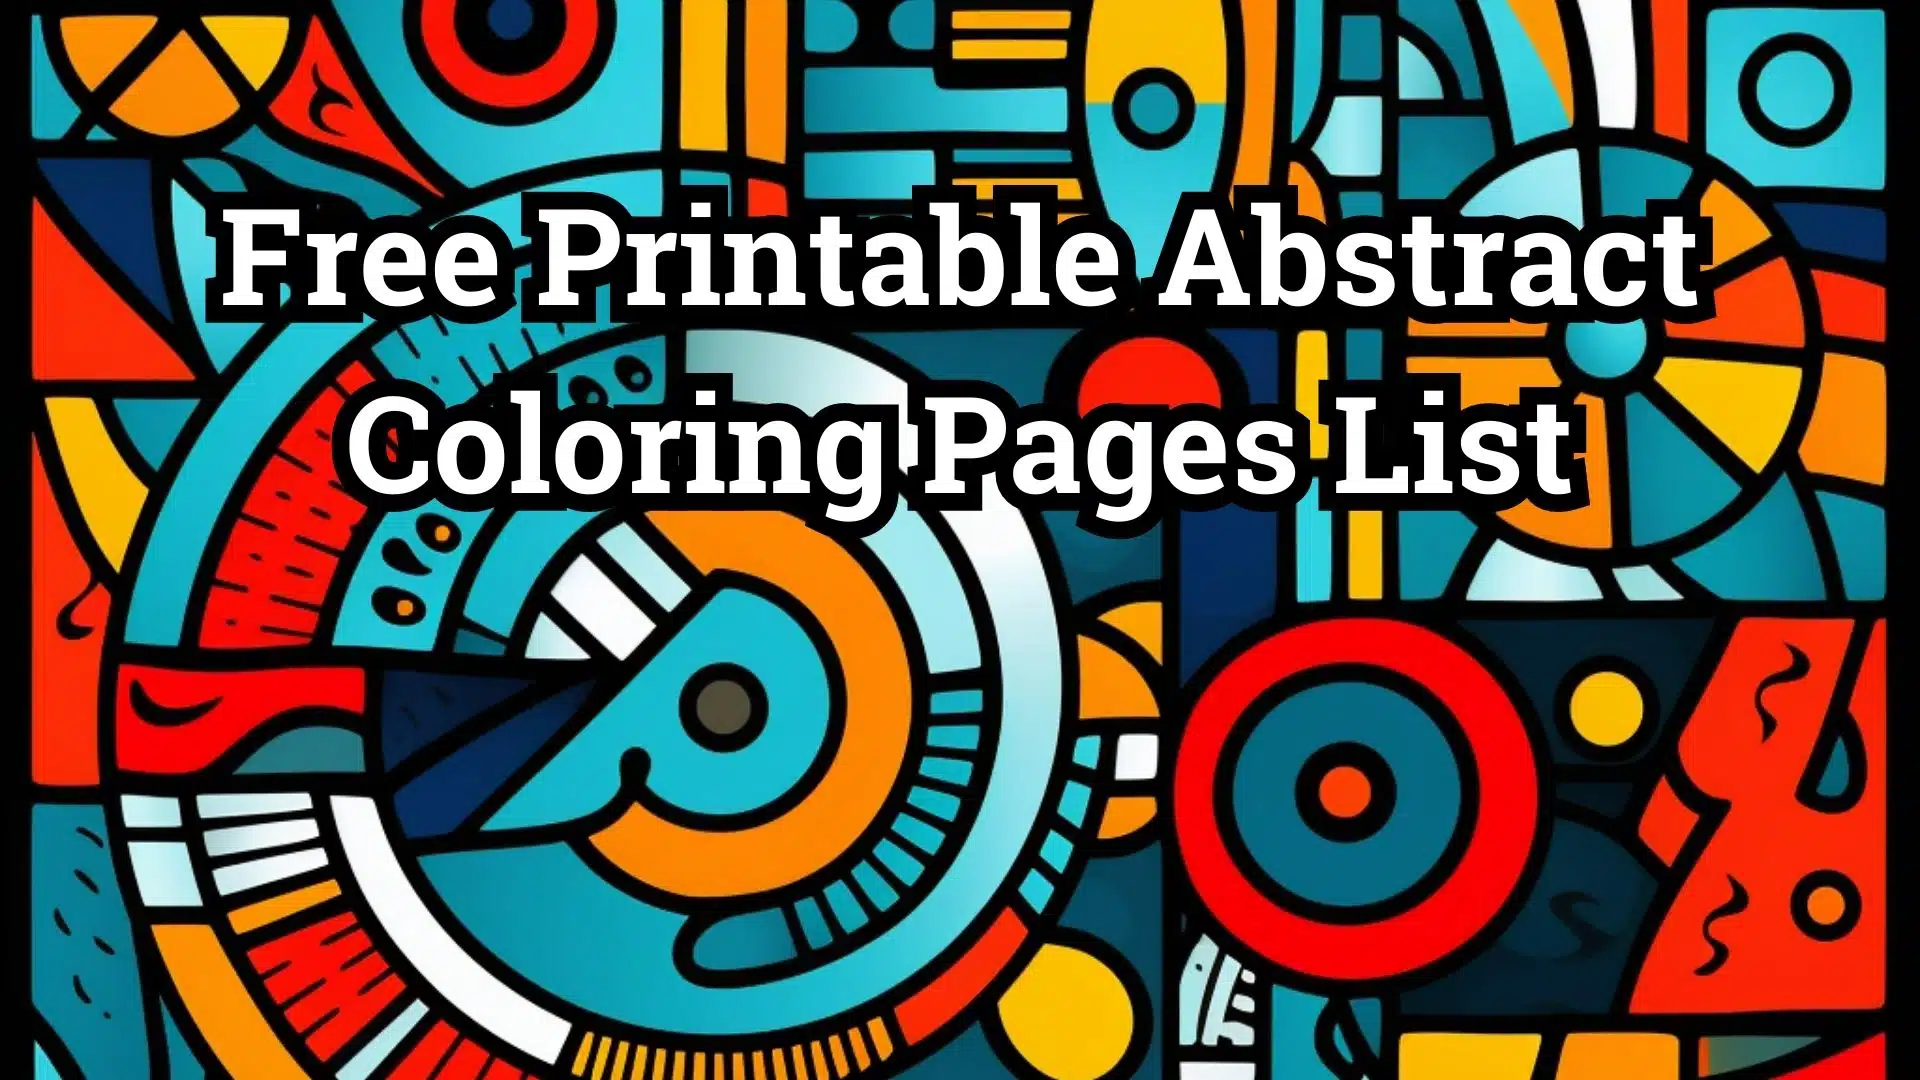 Free Printable Abstract Coloring Pages List